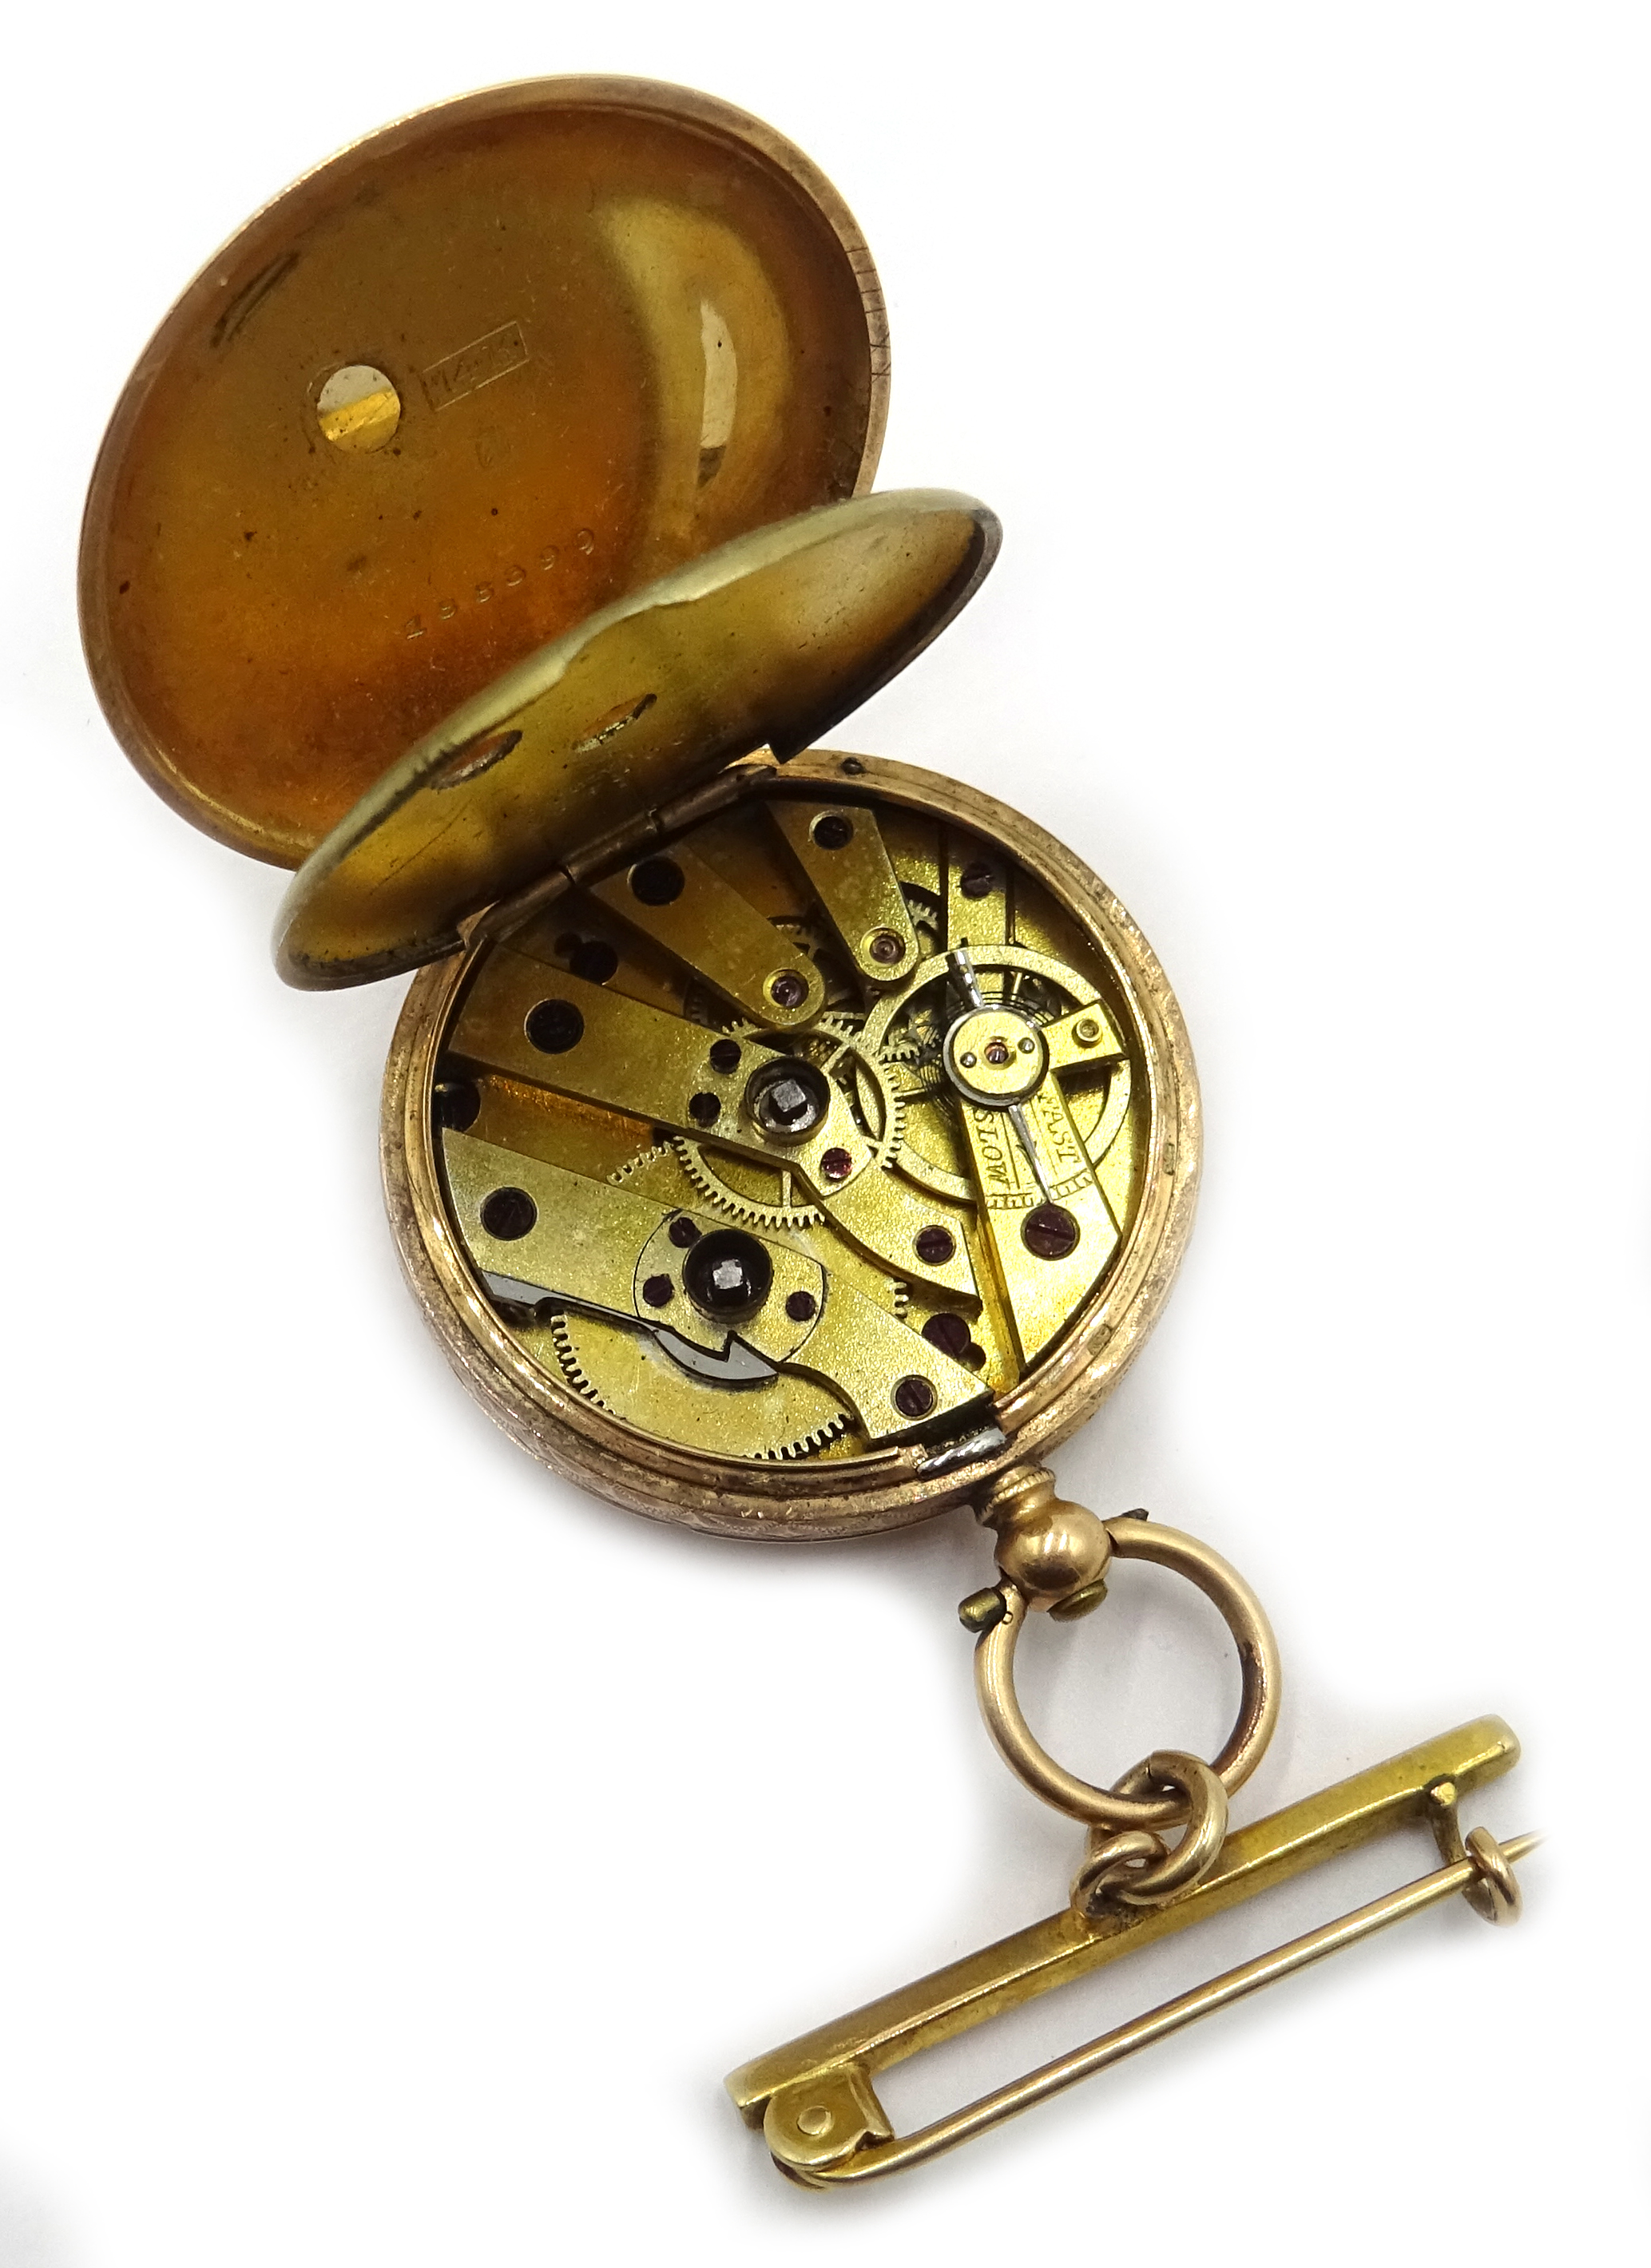 Continental gold fob watch, - Image 3 of 3